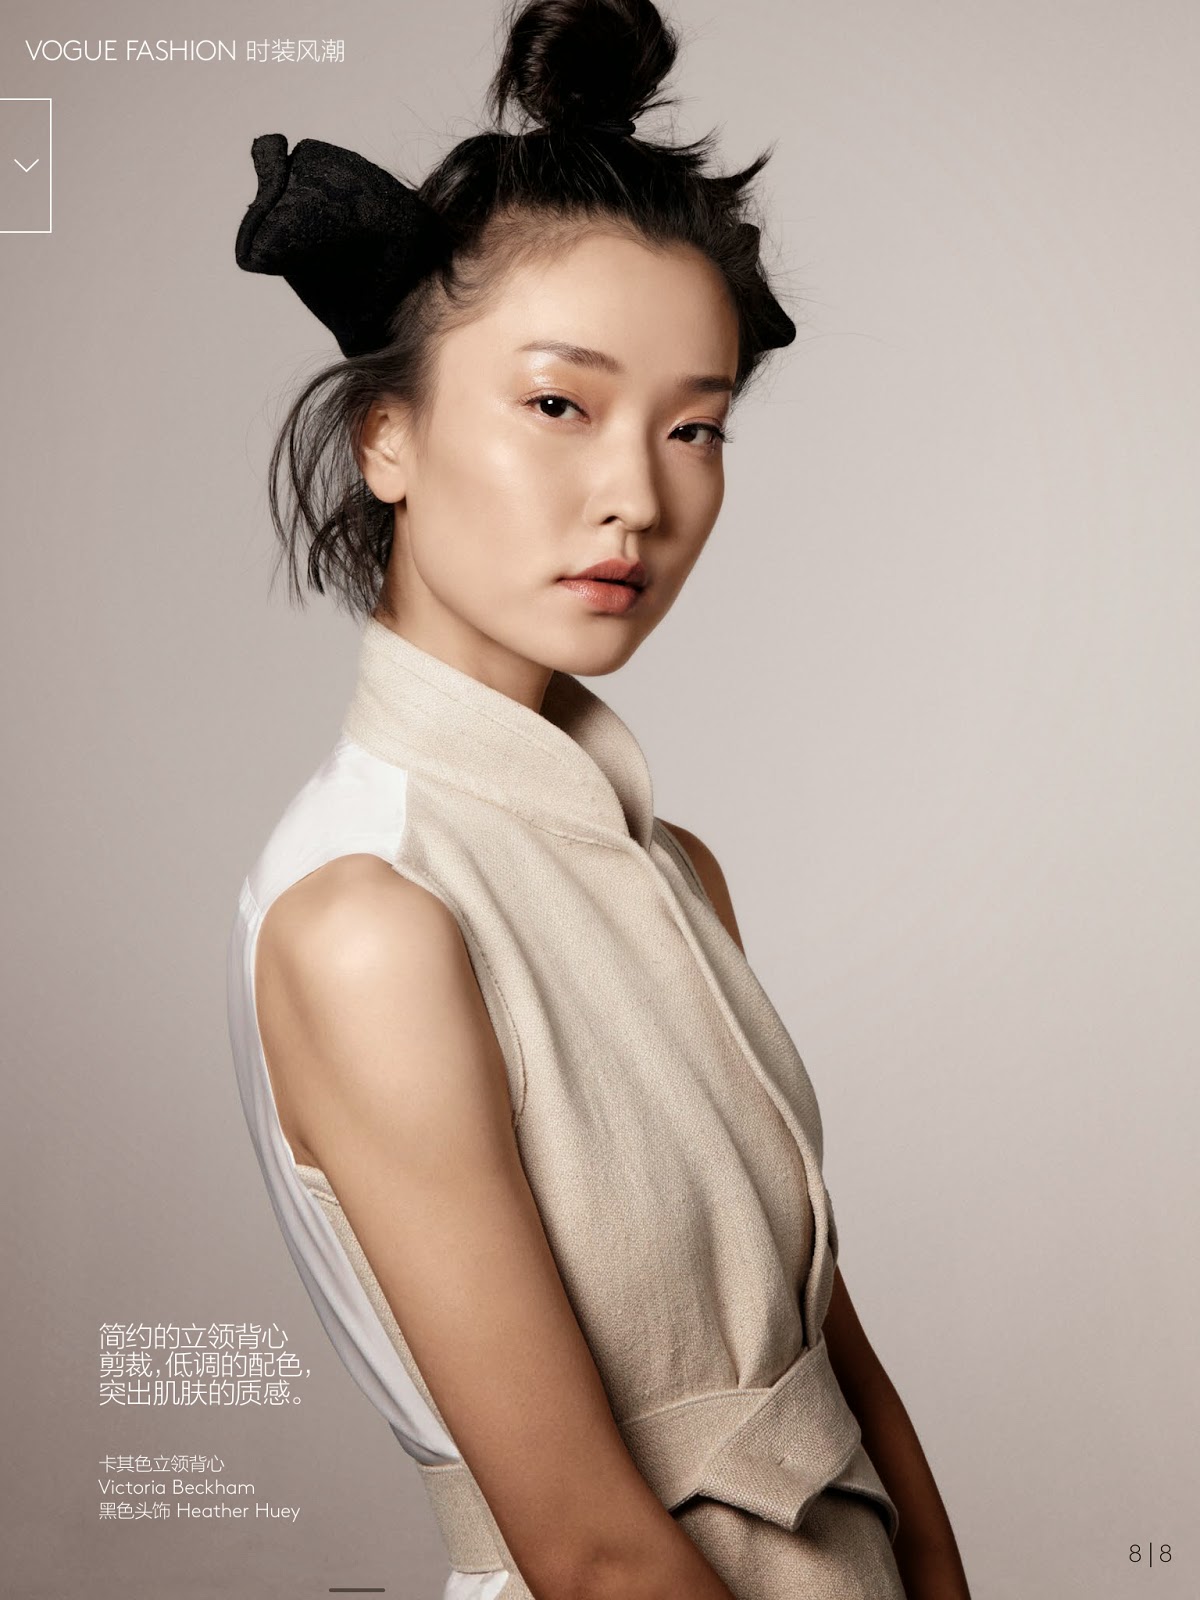 Glossy Newsstand: EXCLUSIVE - VOGUE CHINA FEBRUARY 2015